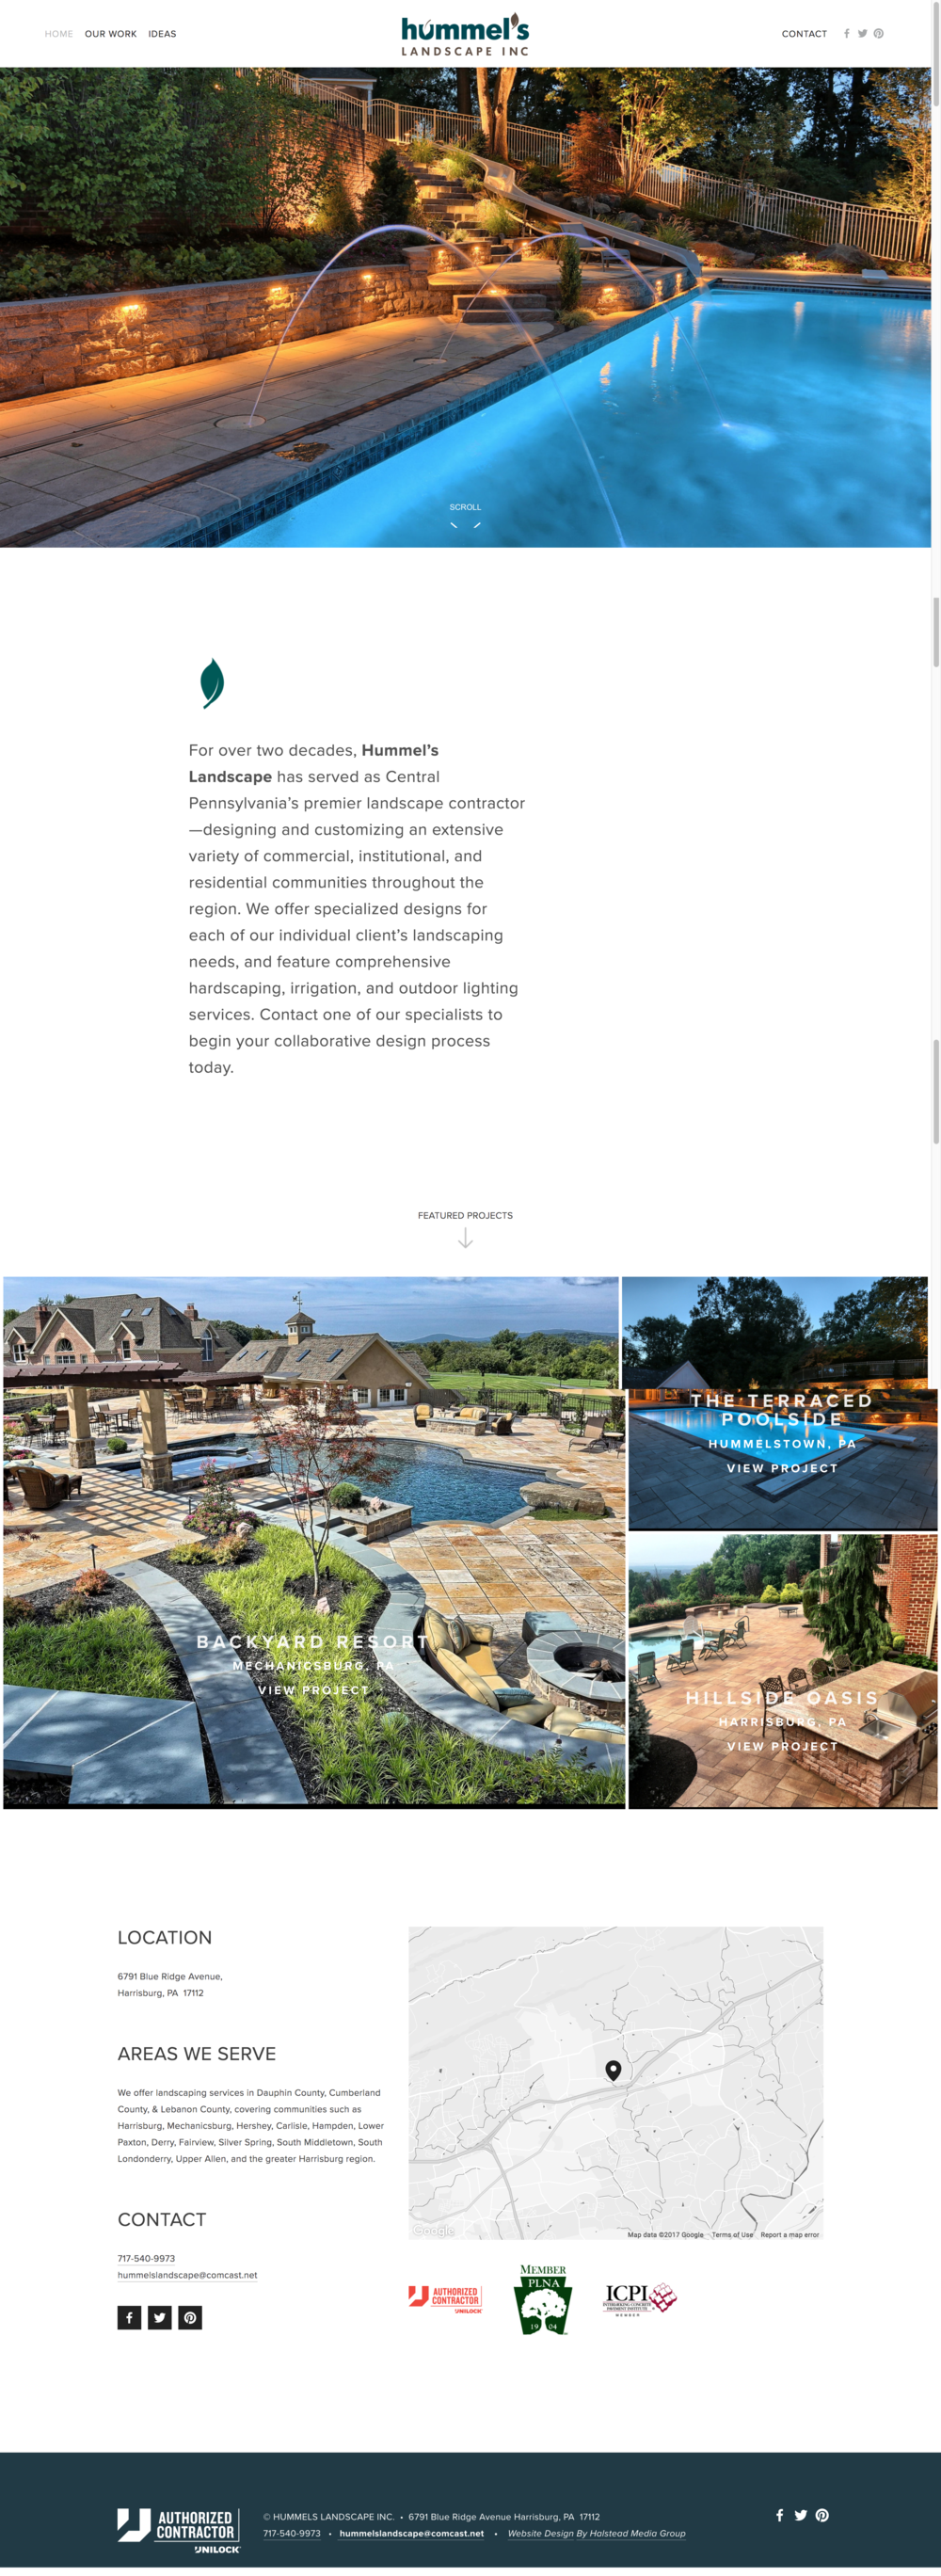 Study: Hummel's Landscape in Pennsylvania gets a new digital Marketing Insights for the Landscape, hardscape, and pool Industries